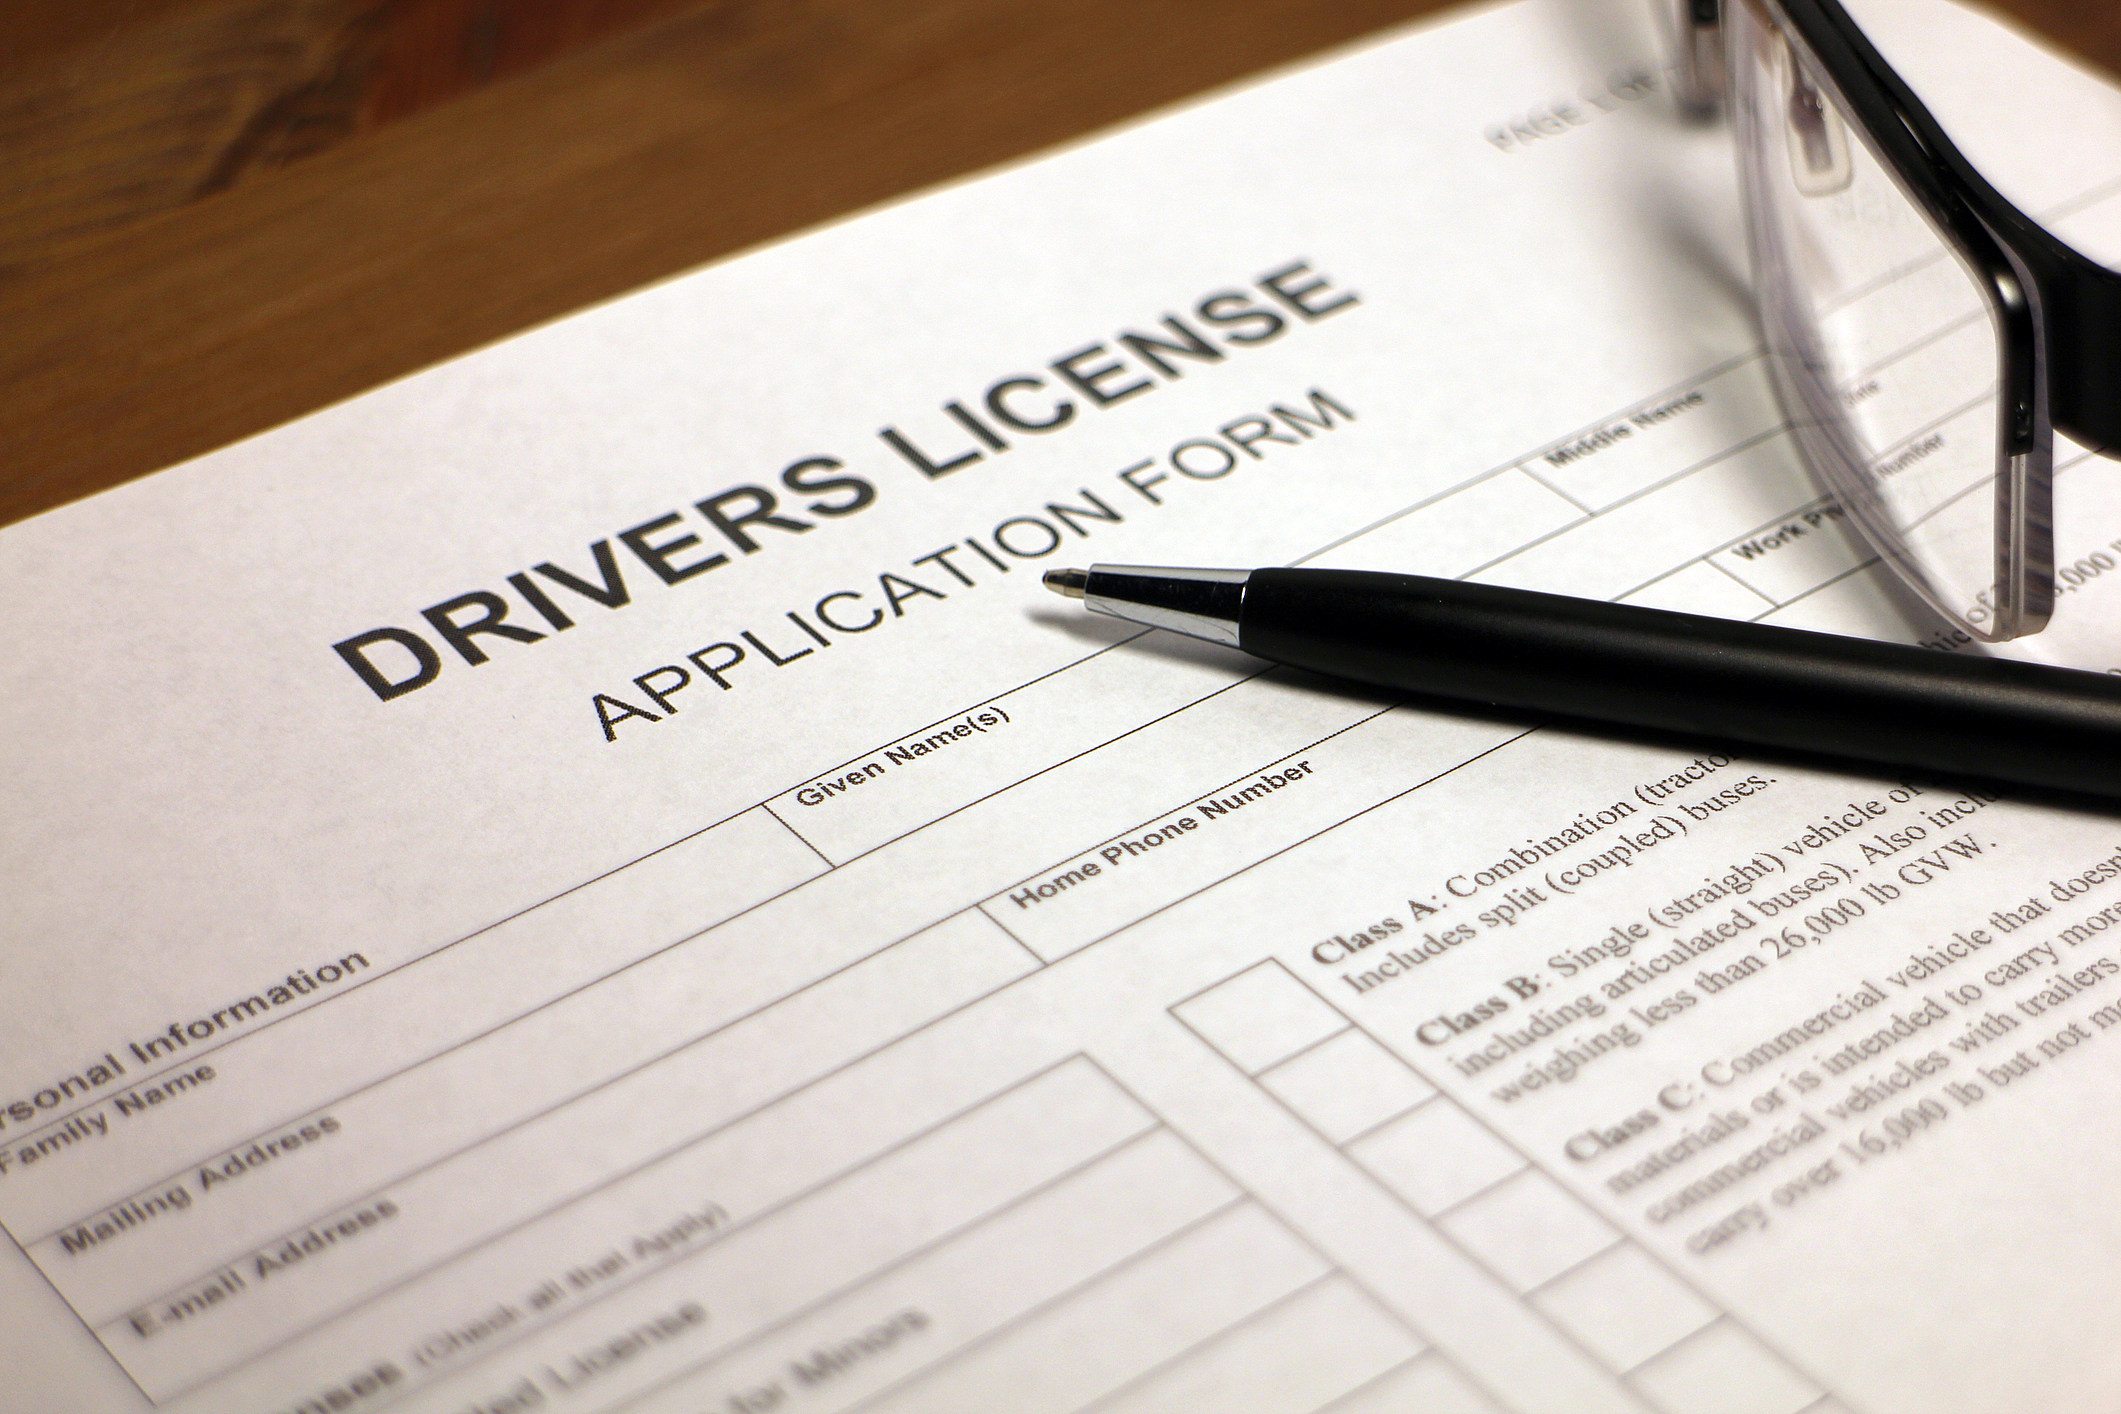 Mass. police chiefs group backs bill to give undocumented immigrants driver's  licenses